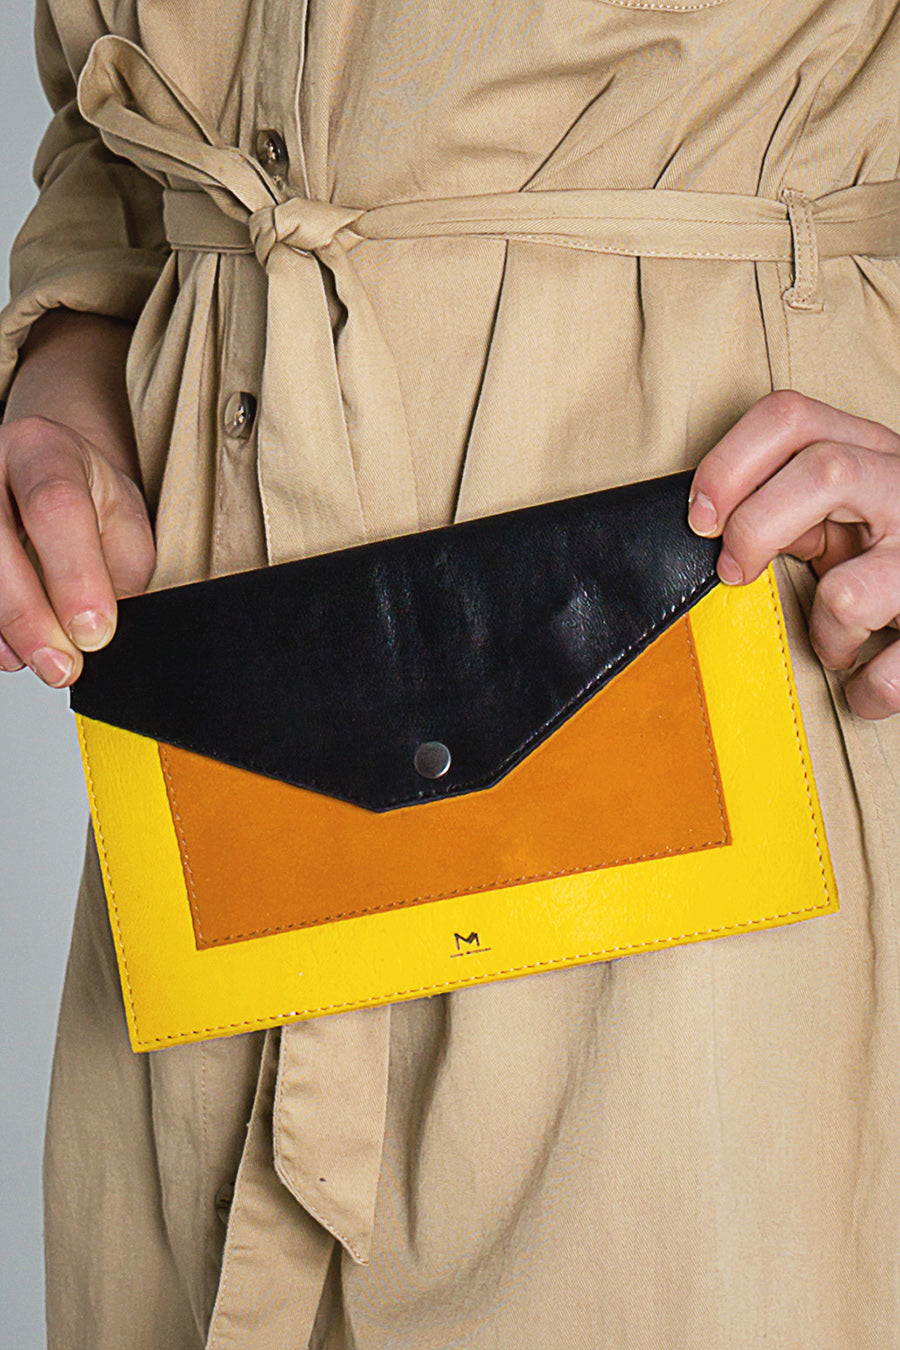 Bauhaus Leather Pouch 2 front view